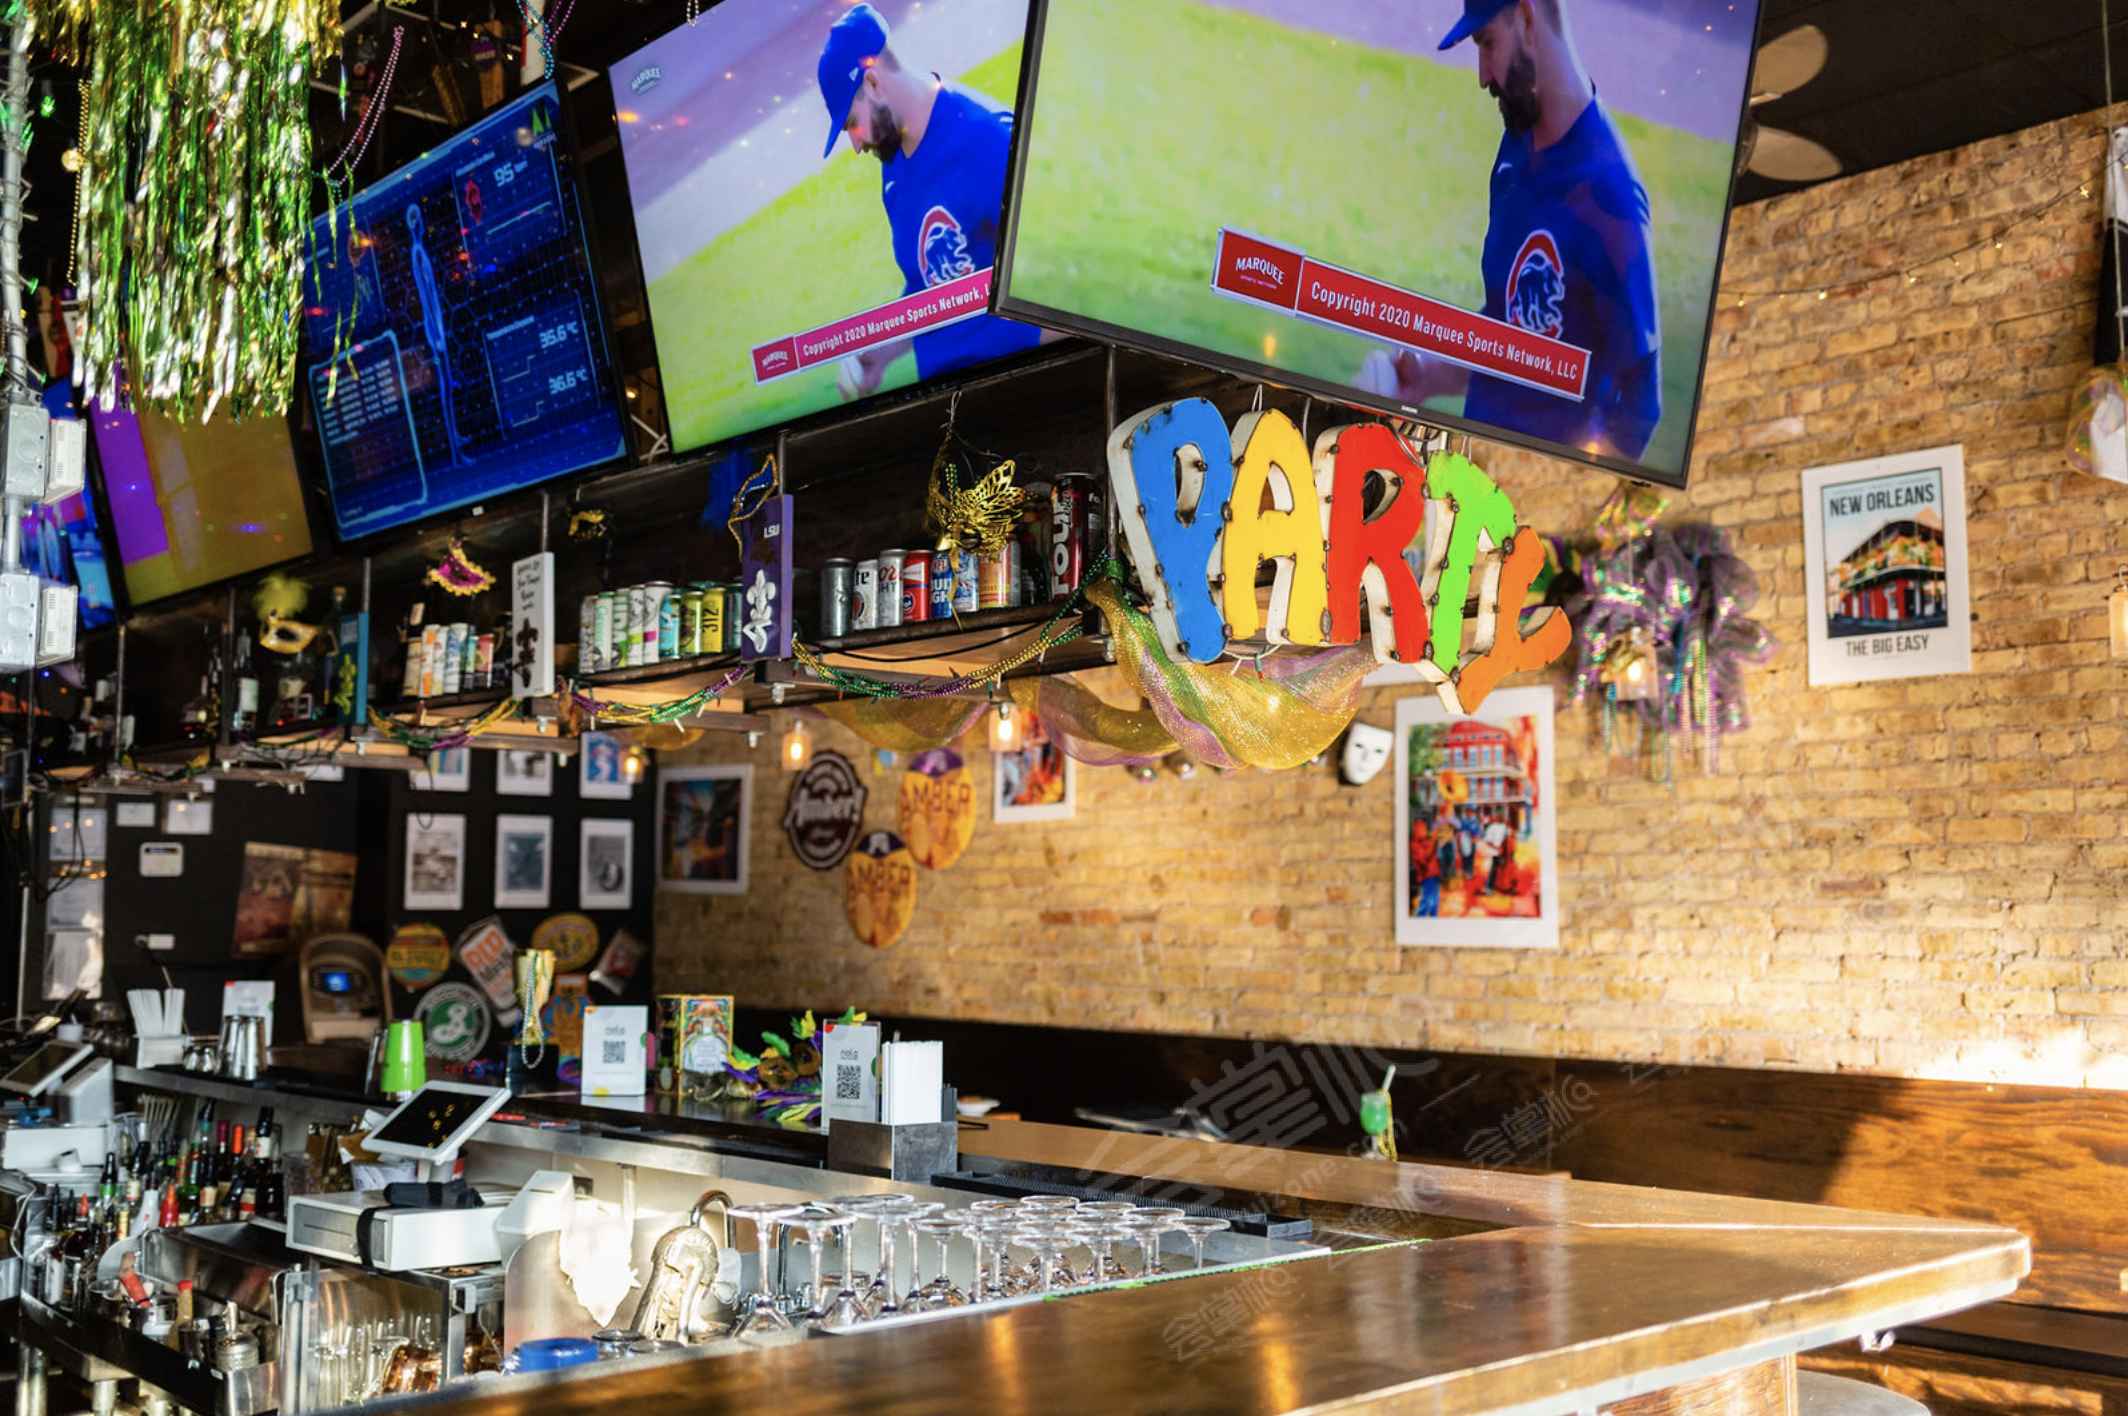 New Orleans theme bar in Wrigley